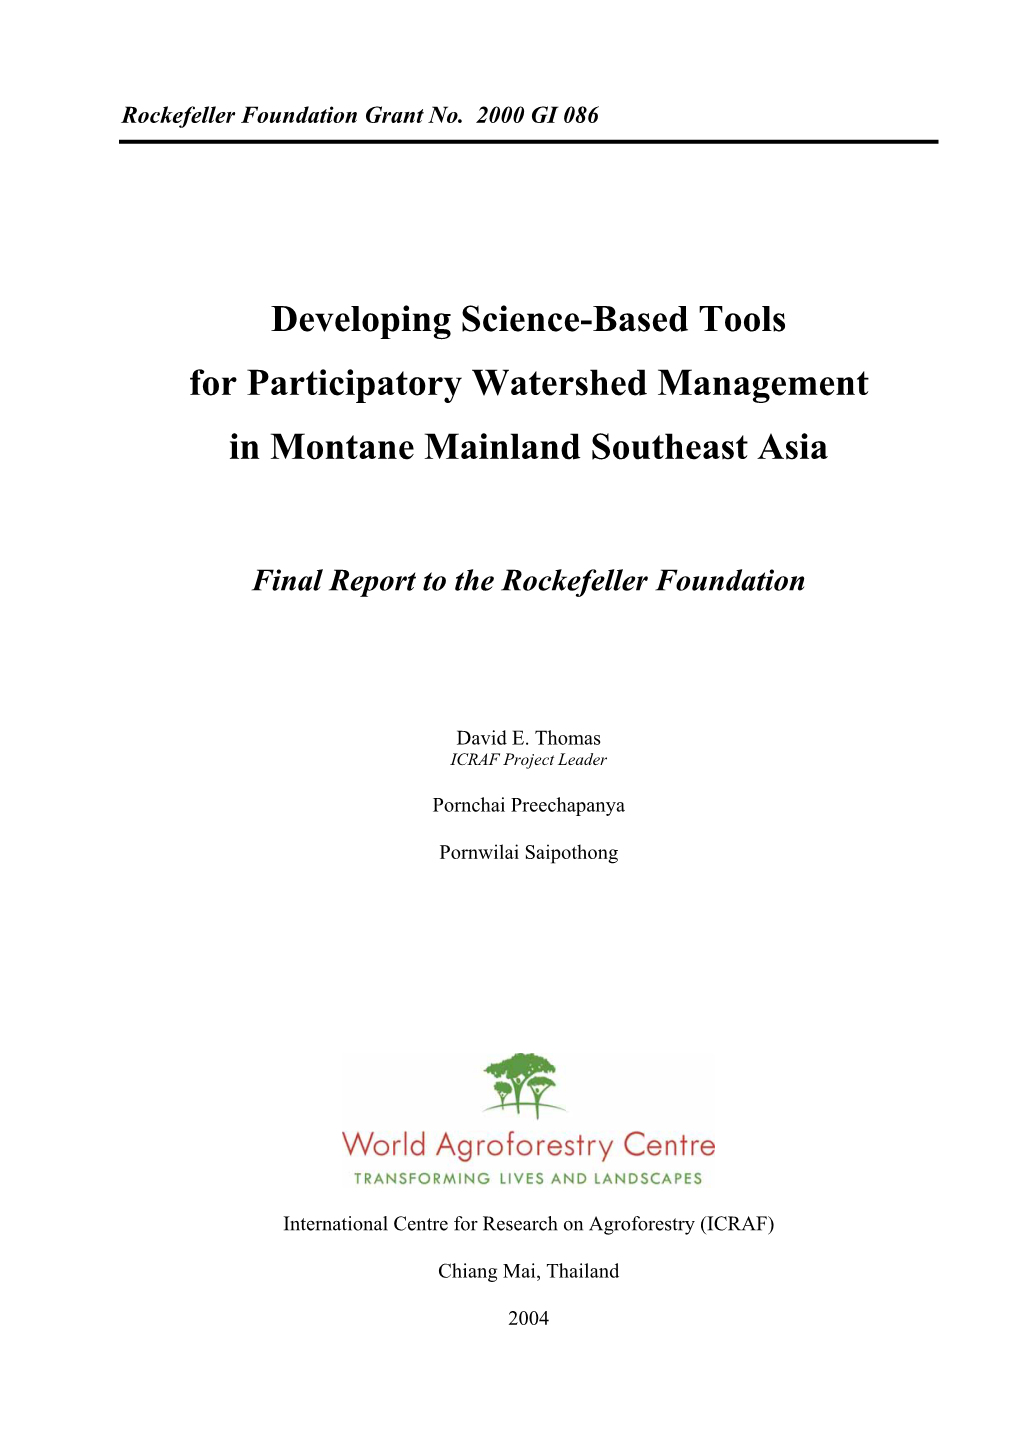 Developing Science-Based Tools for Participatory Watershed Management in Montane Mainland Southeast Asia